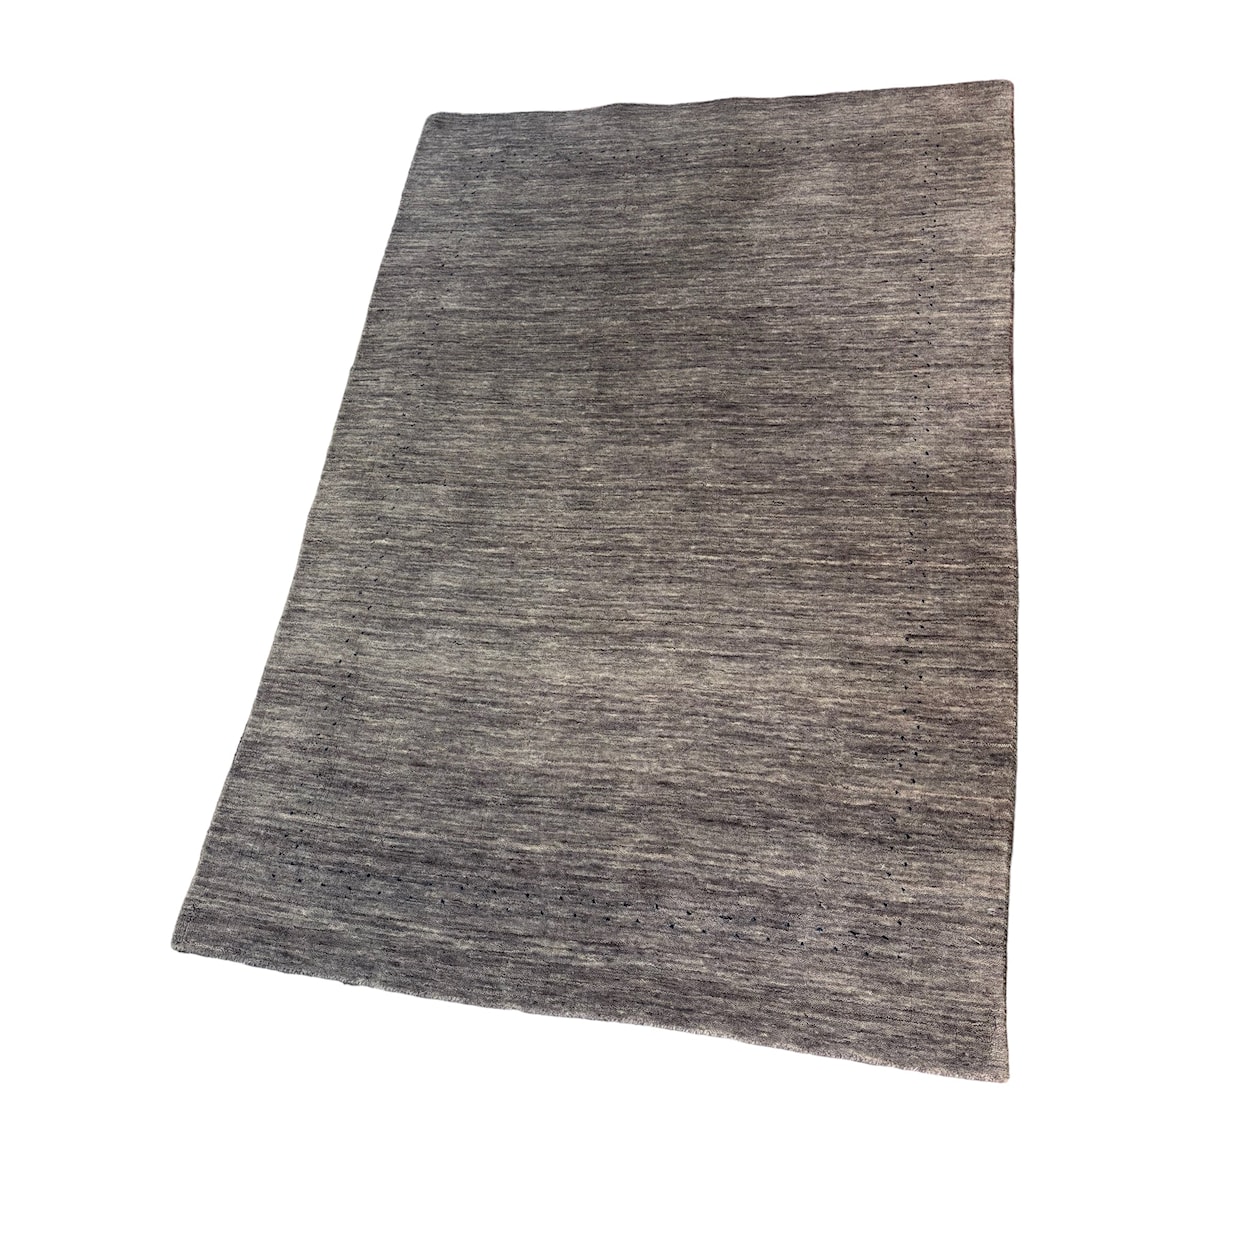 ORC Rugs Clearance Rugs 4'1x5'10 Rug